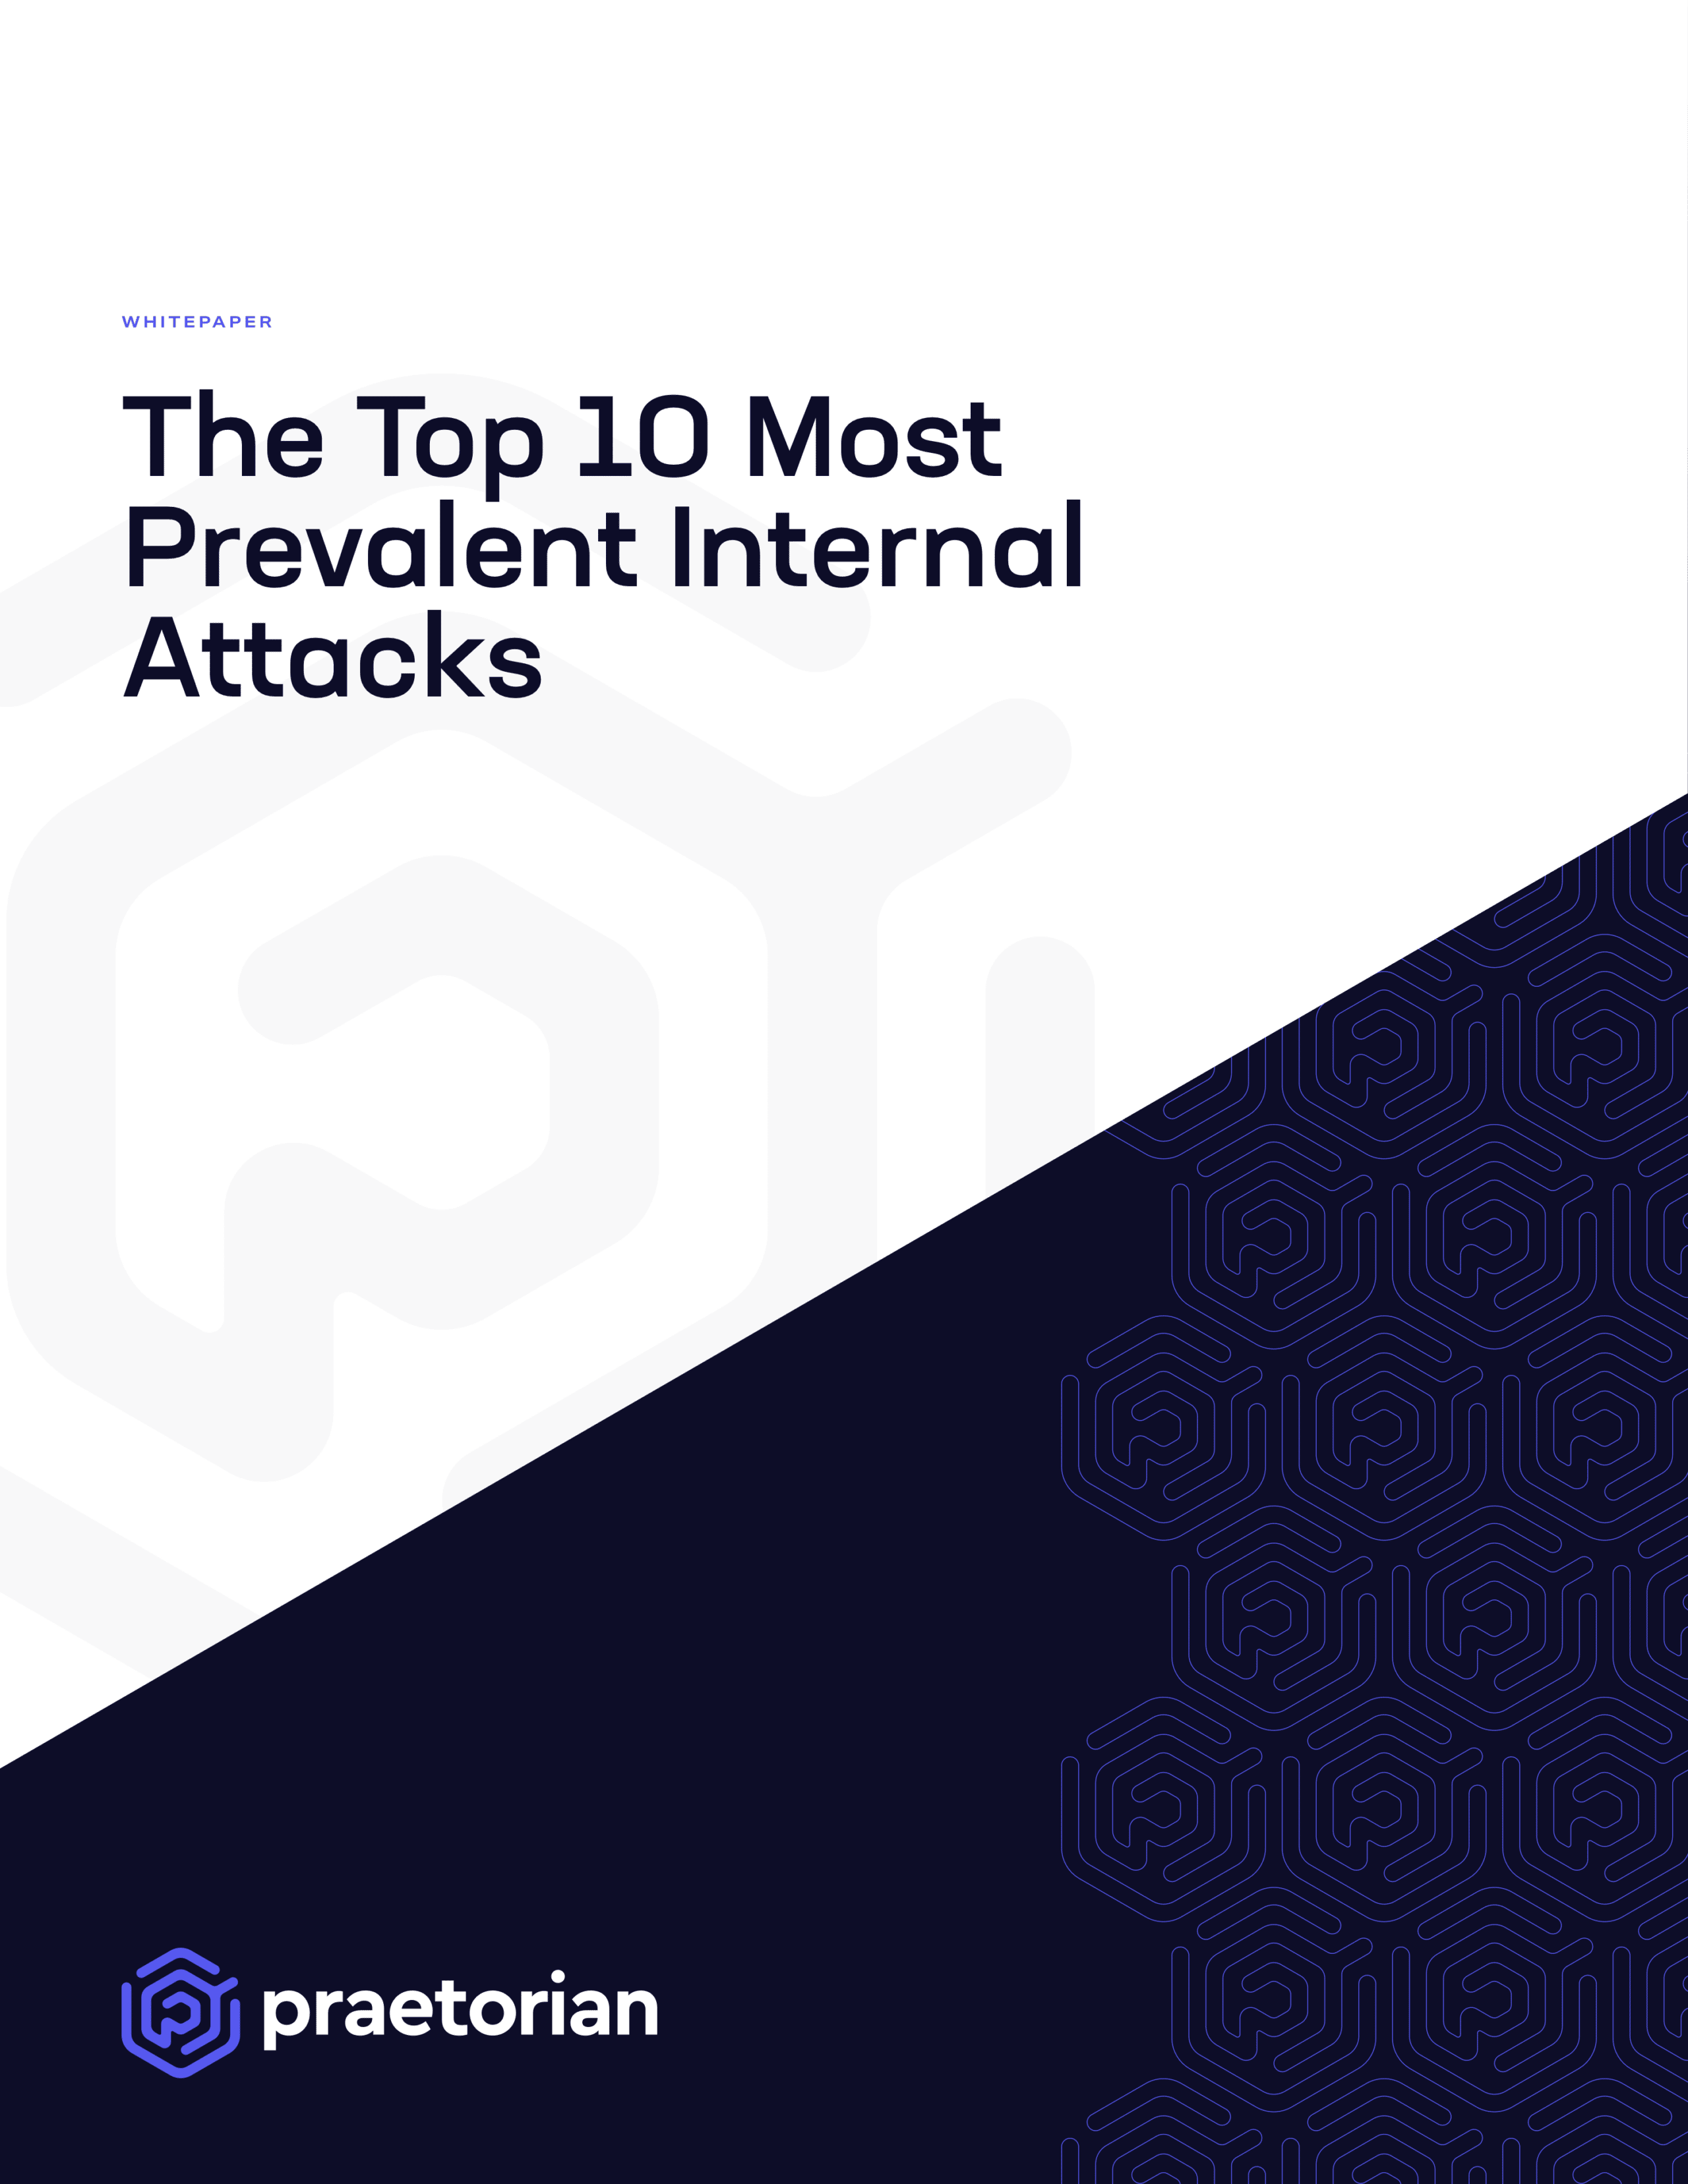 The Top 10 Most Prevalent Internal Attacks